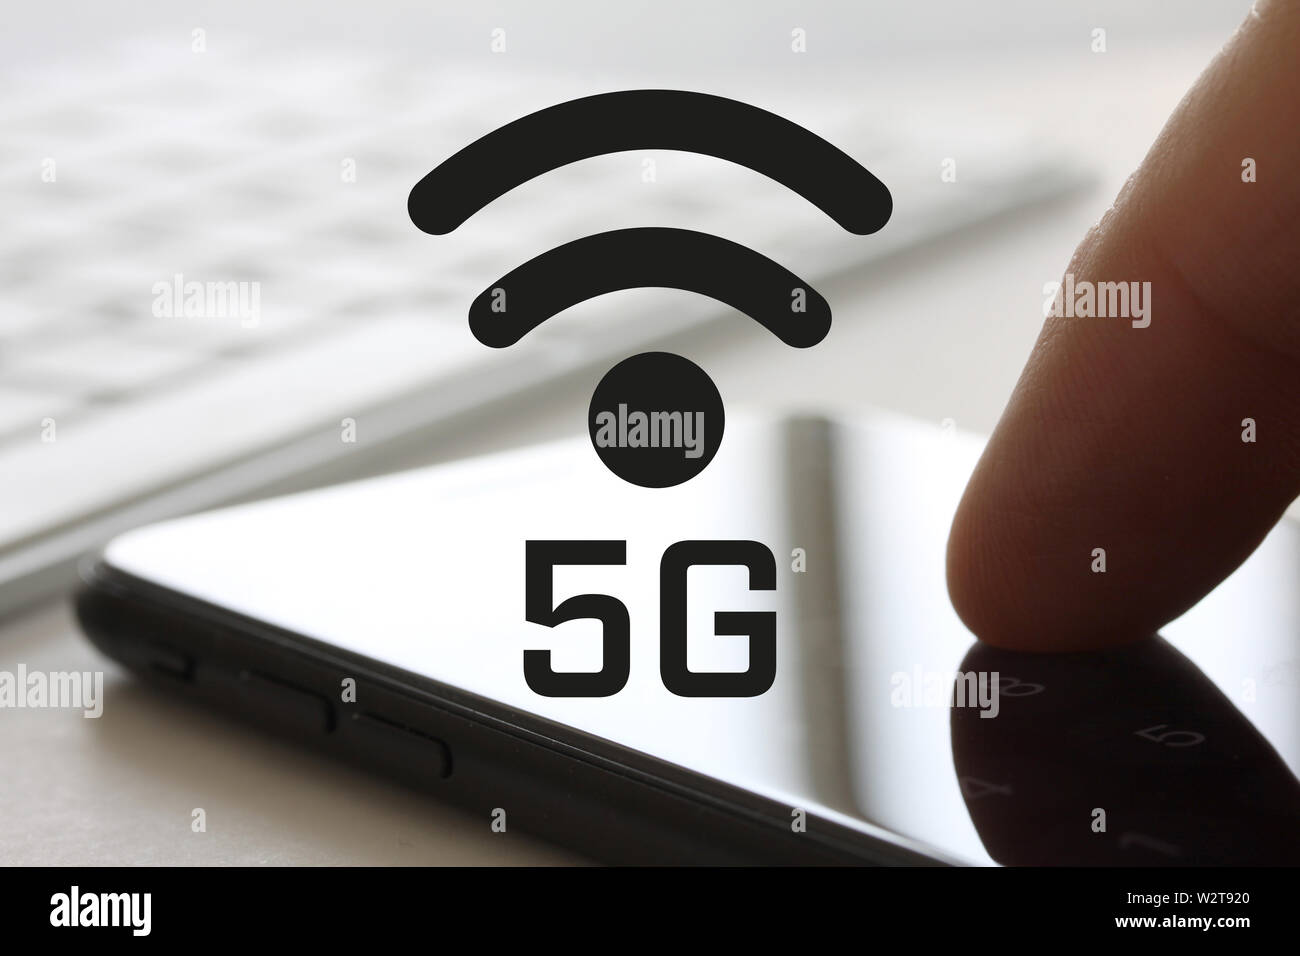 5G network concept with finger touching smartphone with screen and keybord in background. Wireless internet symbol in front of display. Stock Photo